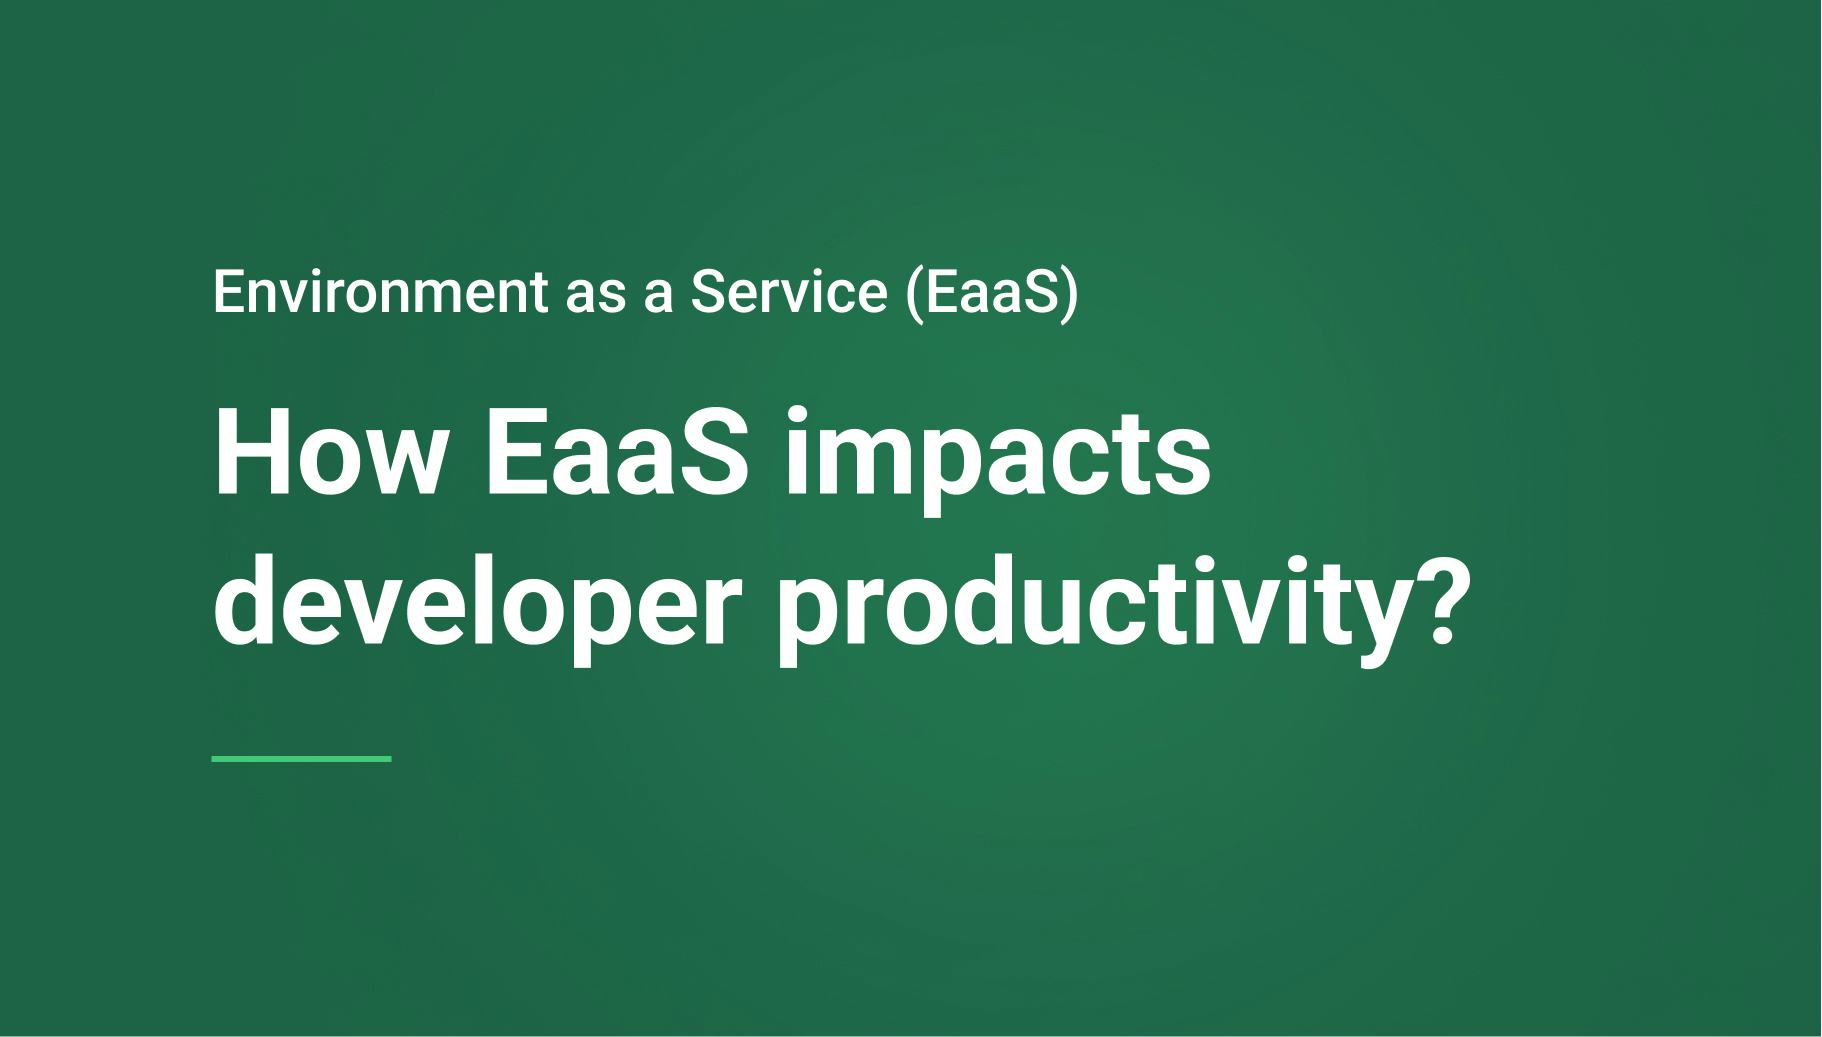 What is Environment as a Service (EaaS) and How is it Impacting Productivity?